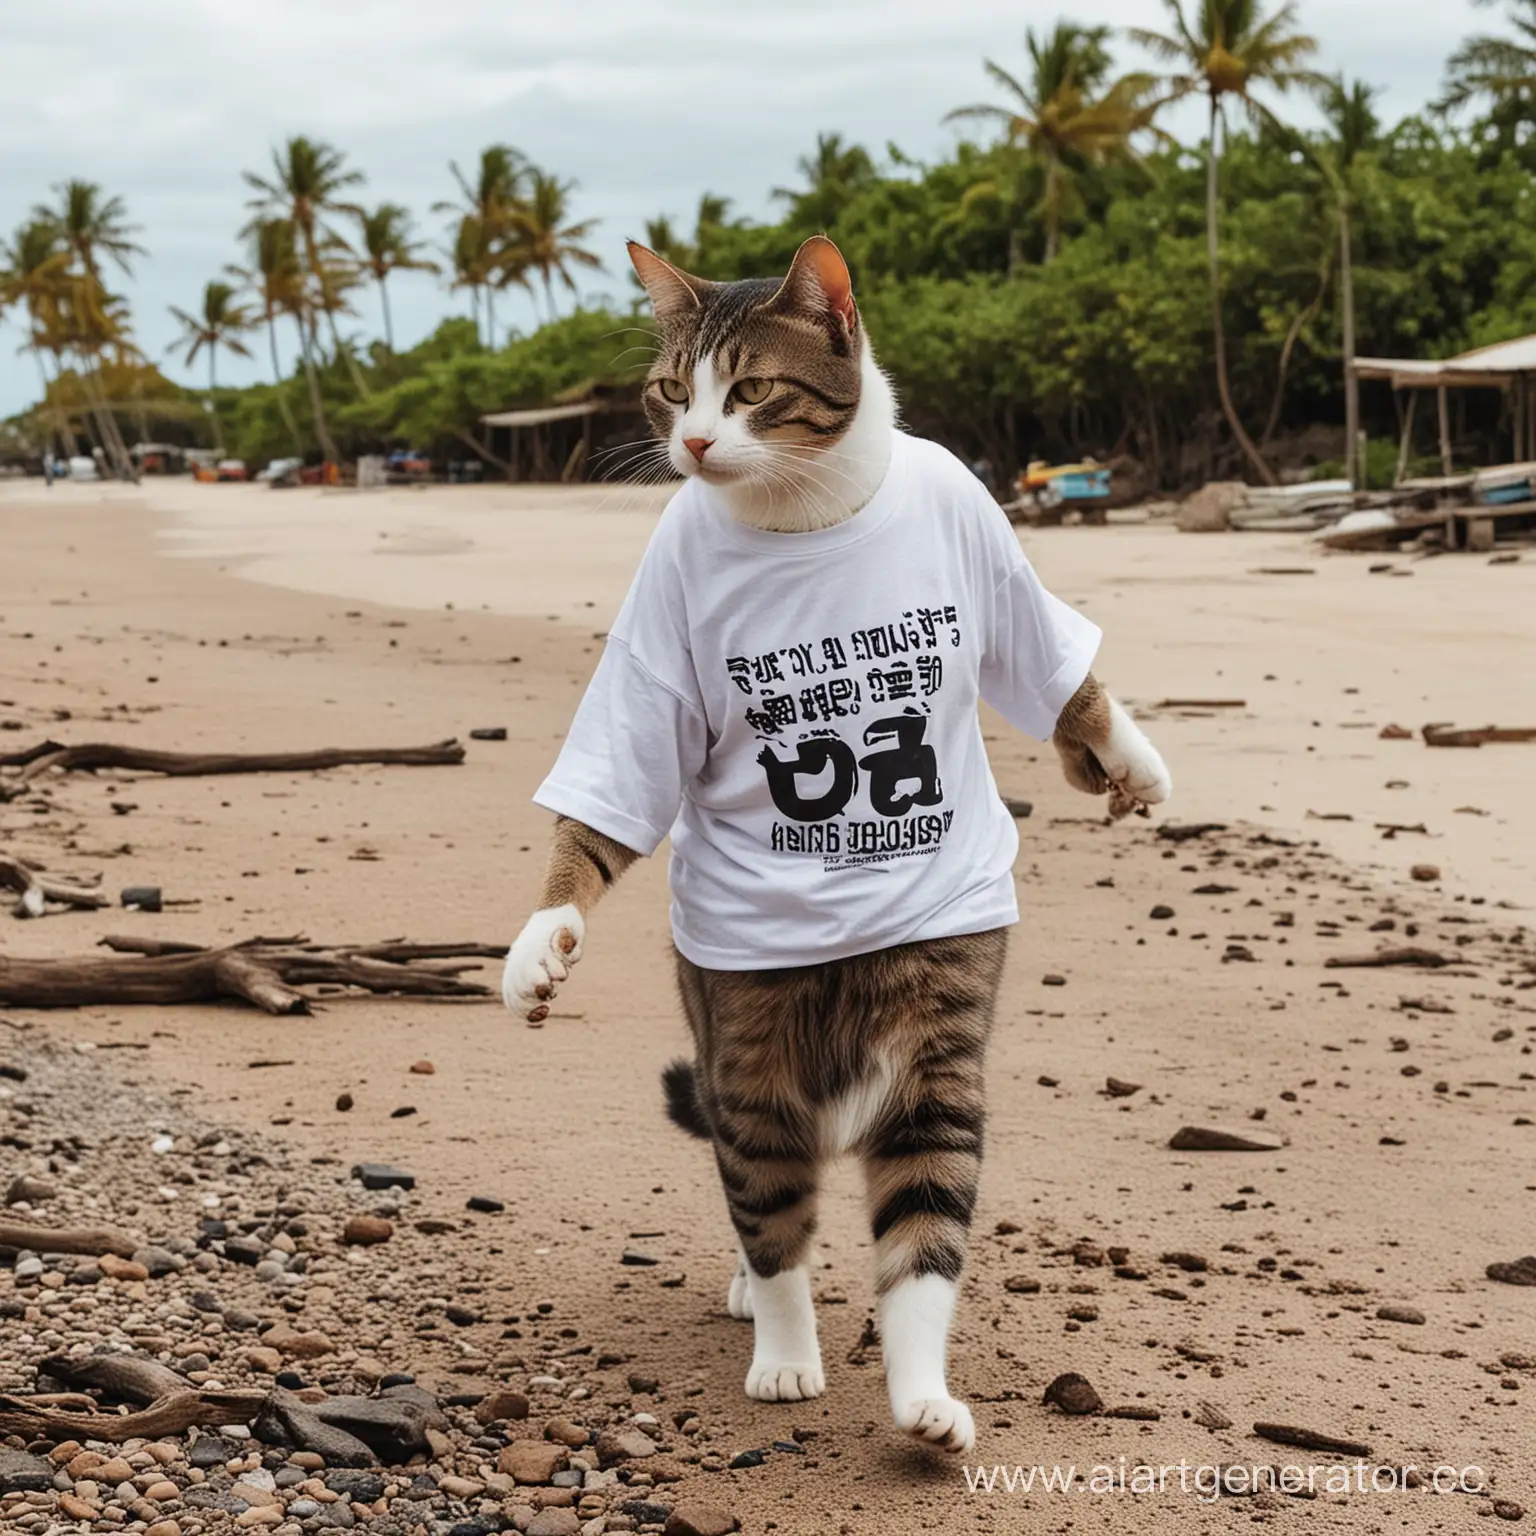 A cat in a T-shirt walks around the island
